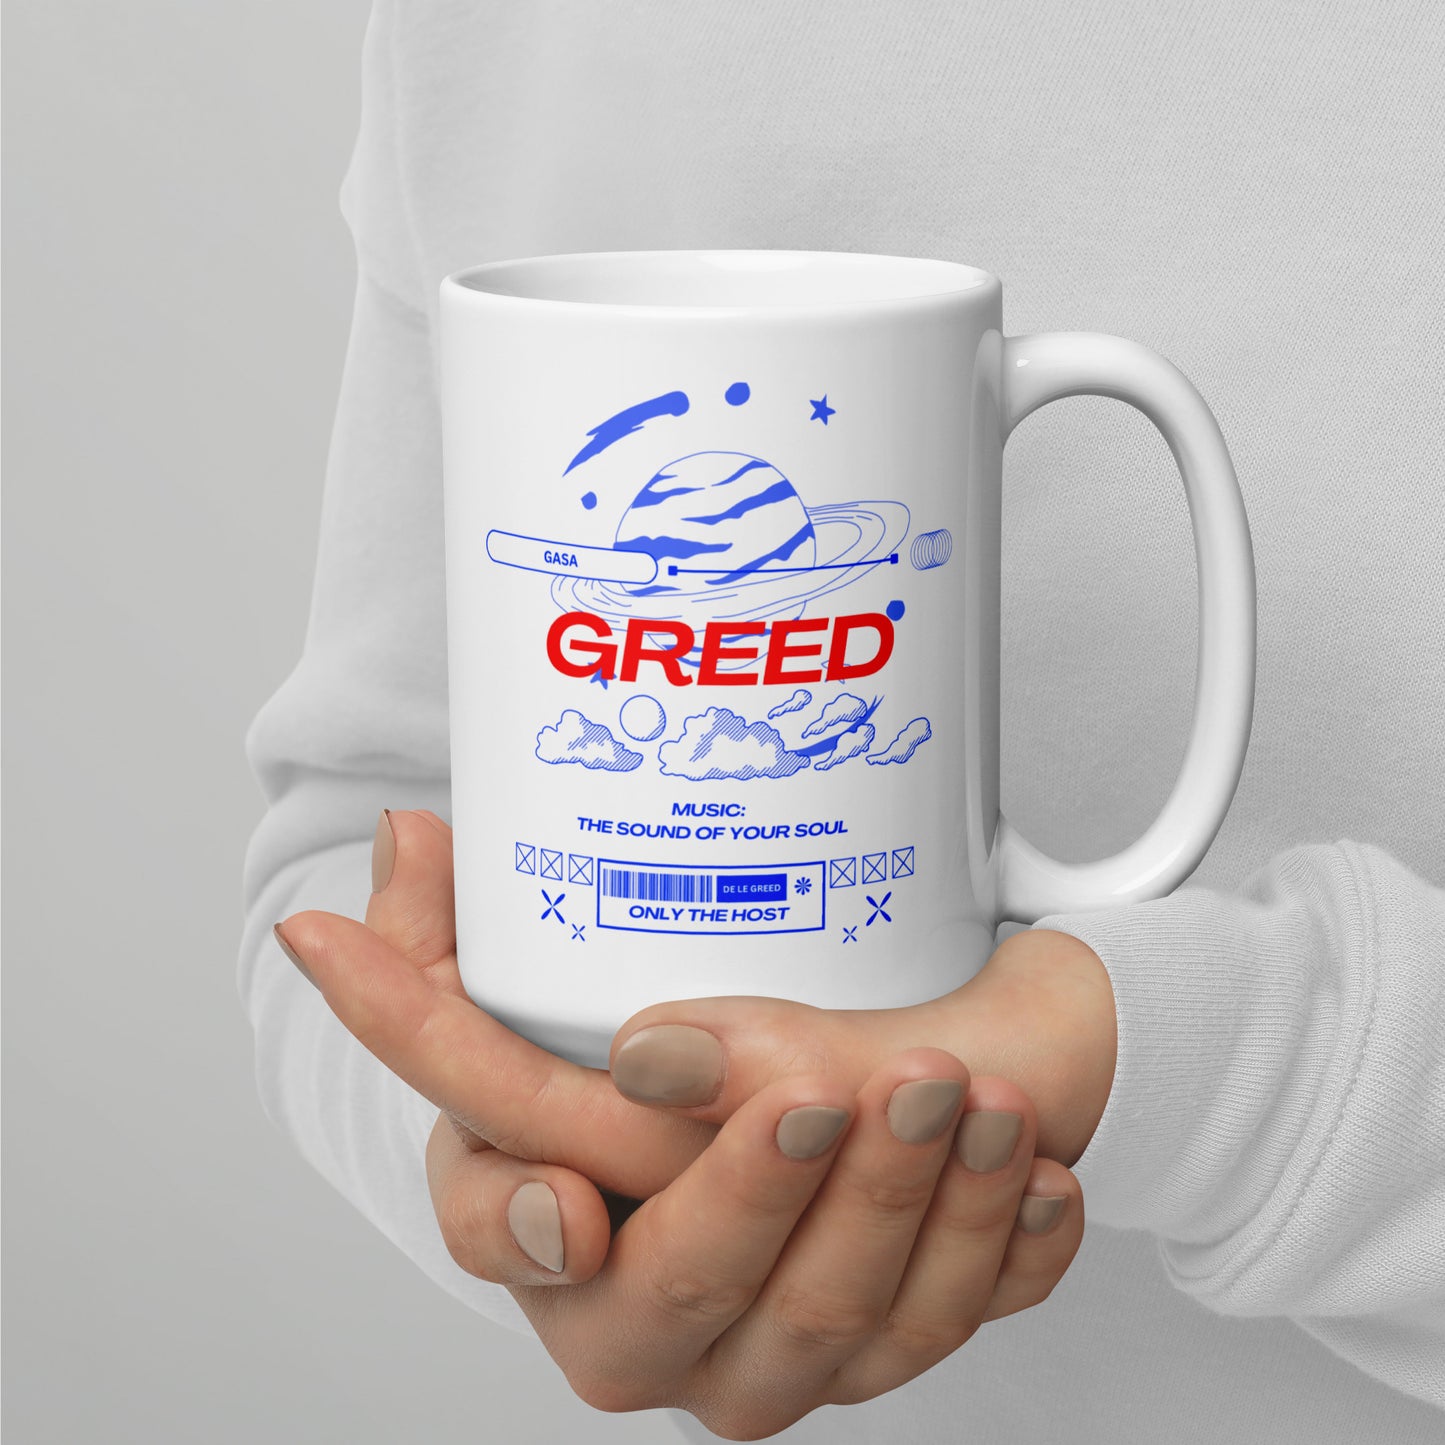 De Le Greed Sound of Your Soul White Glossy Mug